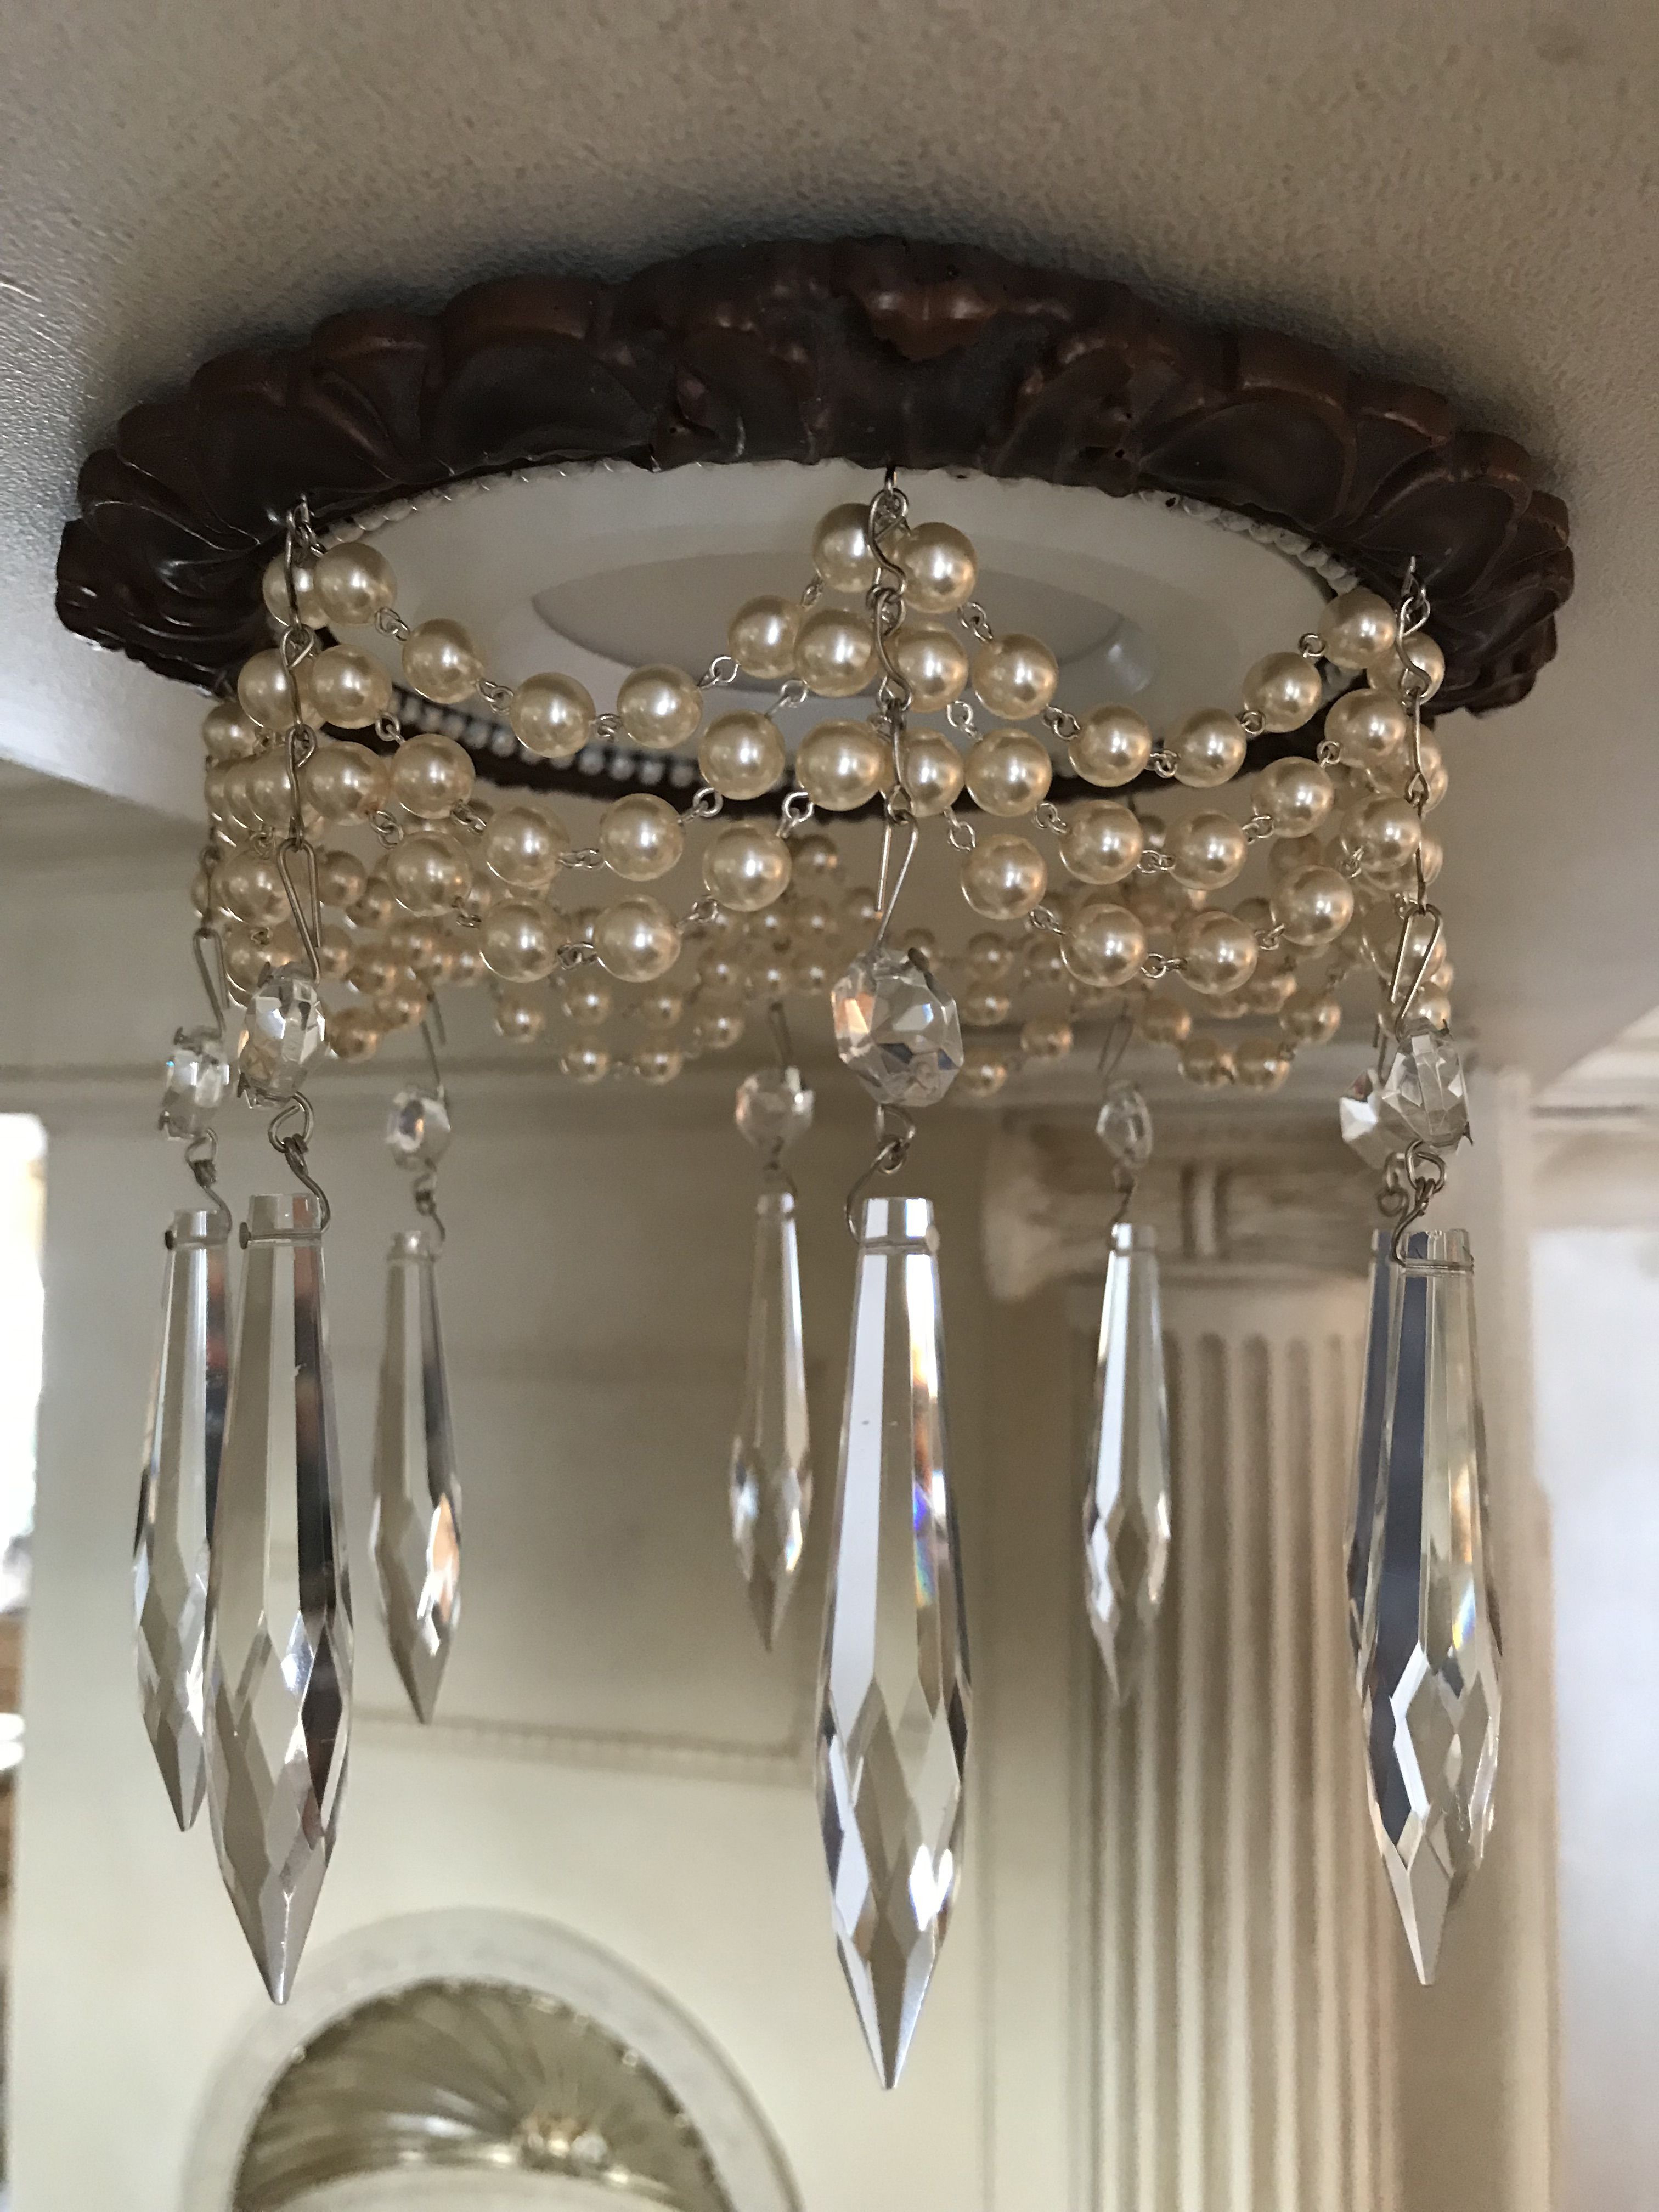 decorative recessed light trim embellished with triple strand of pearls and 3" U-drop crystals